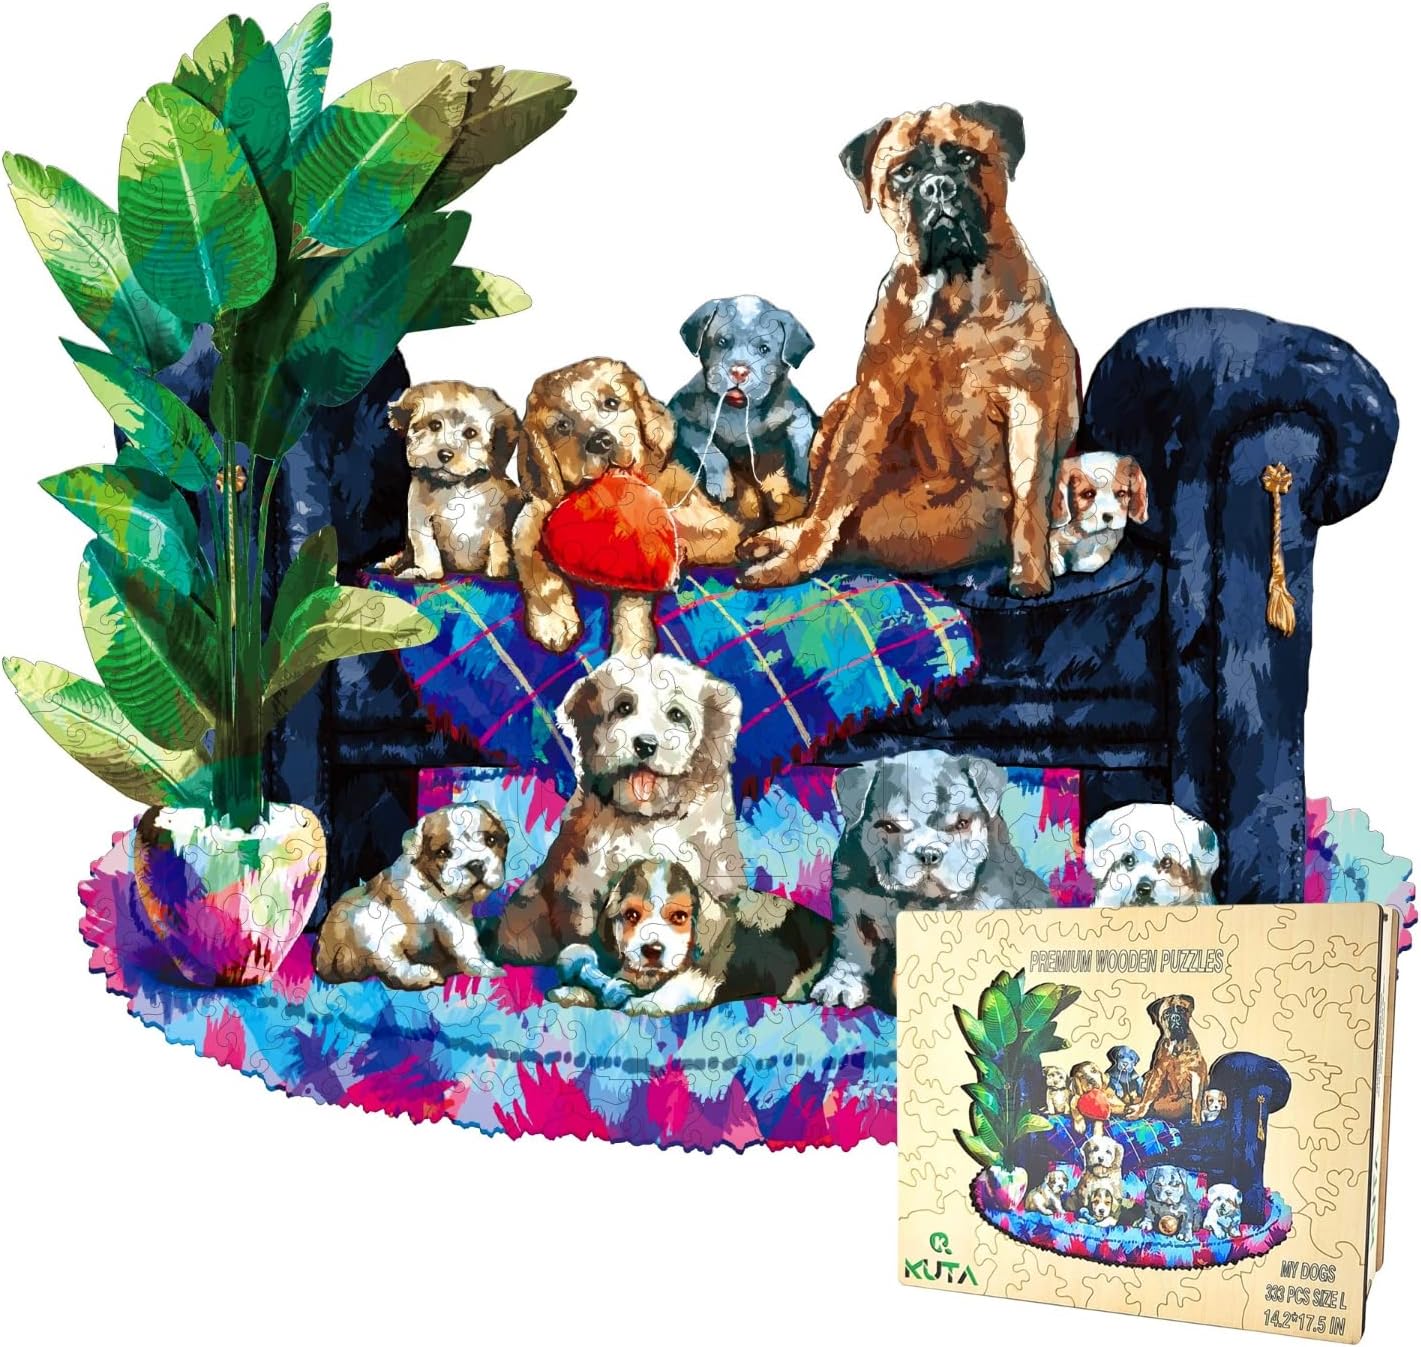 KUTA Wooden Jigsaw Puzzles, Unique Animal Shape, Set with Wall Mounting Kits for Decoration, Best Gift for Children and Adults (Dog XL)